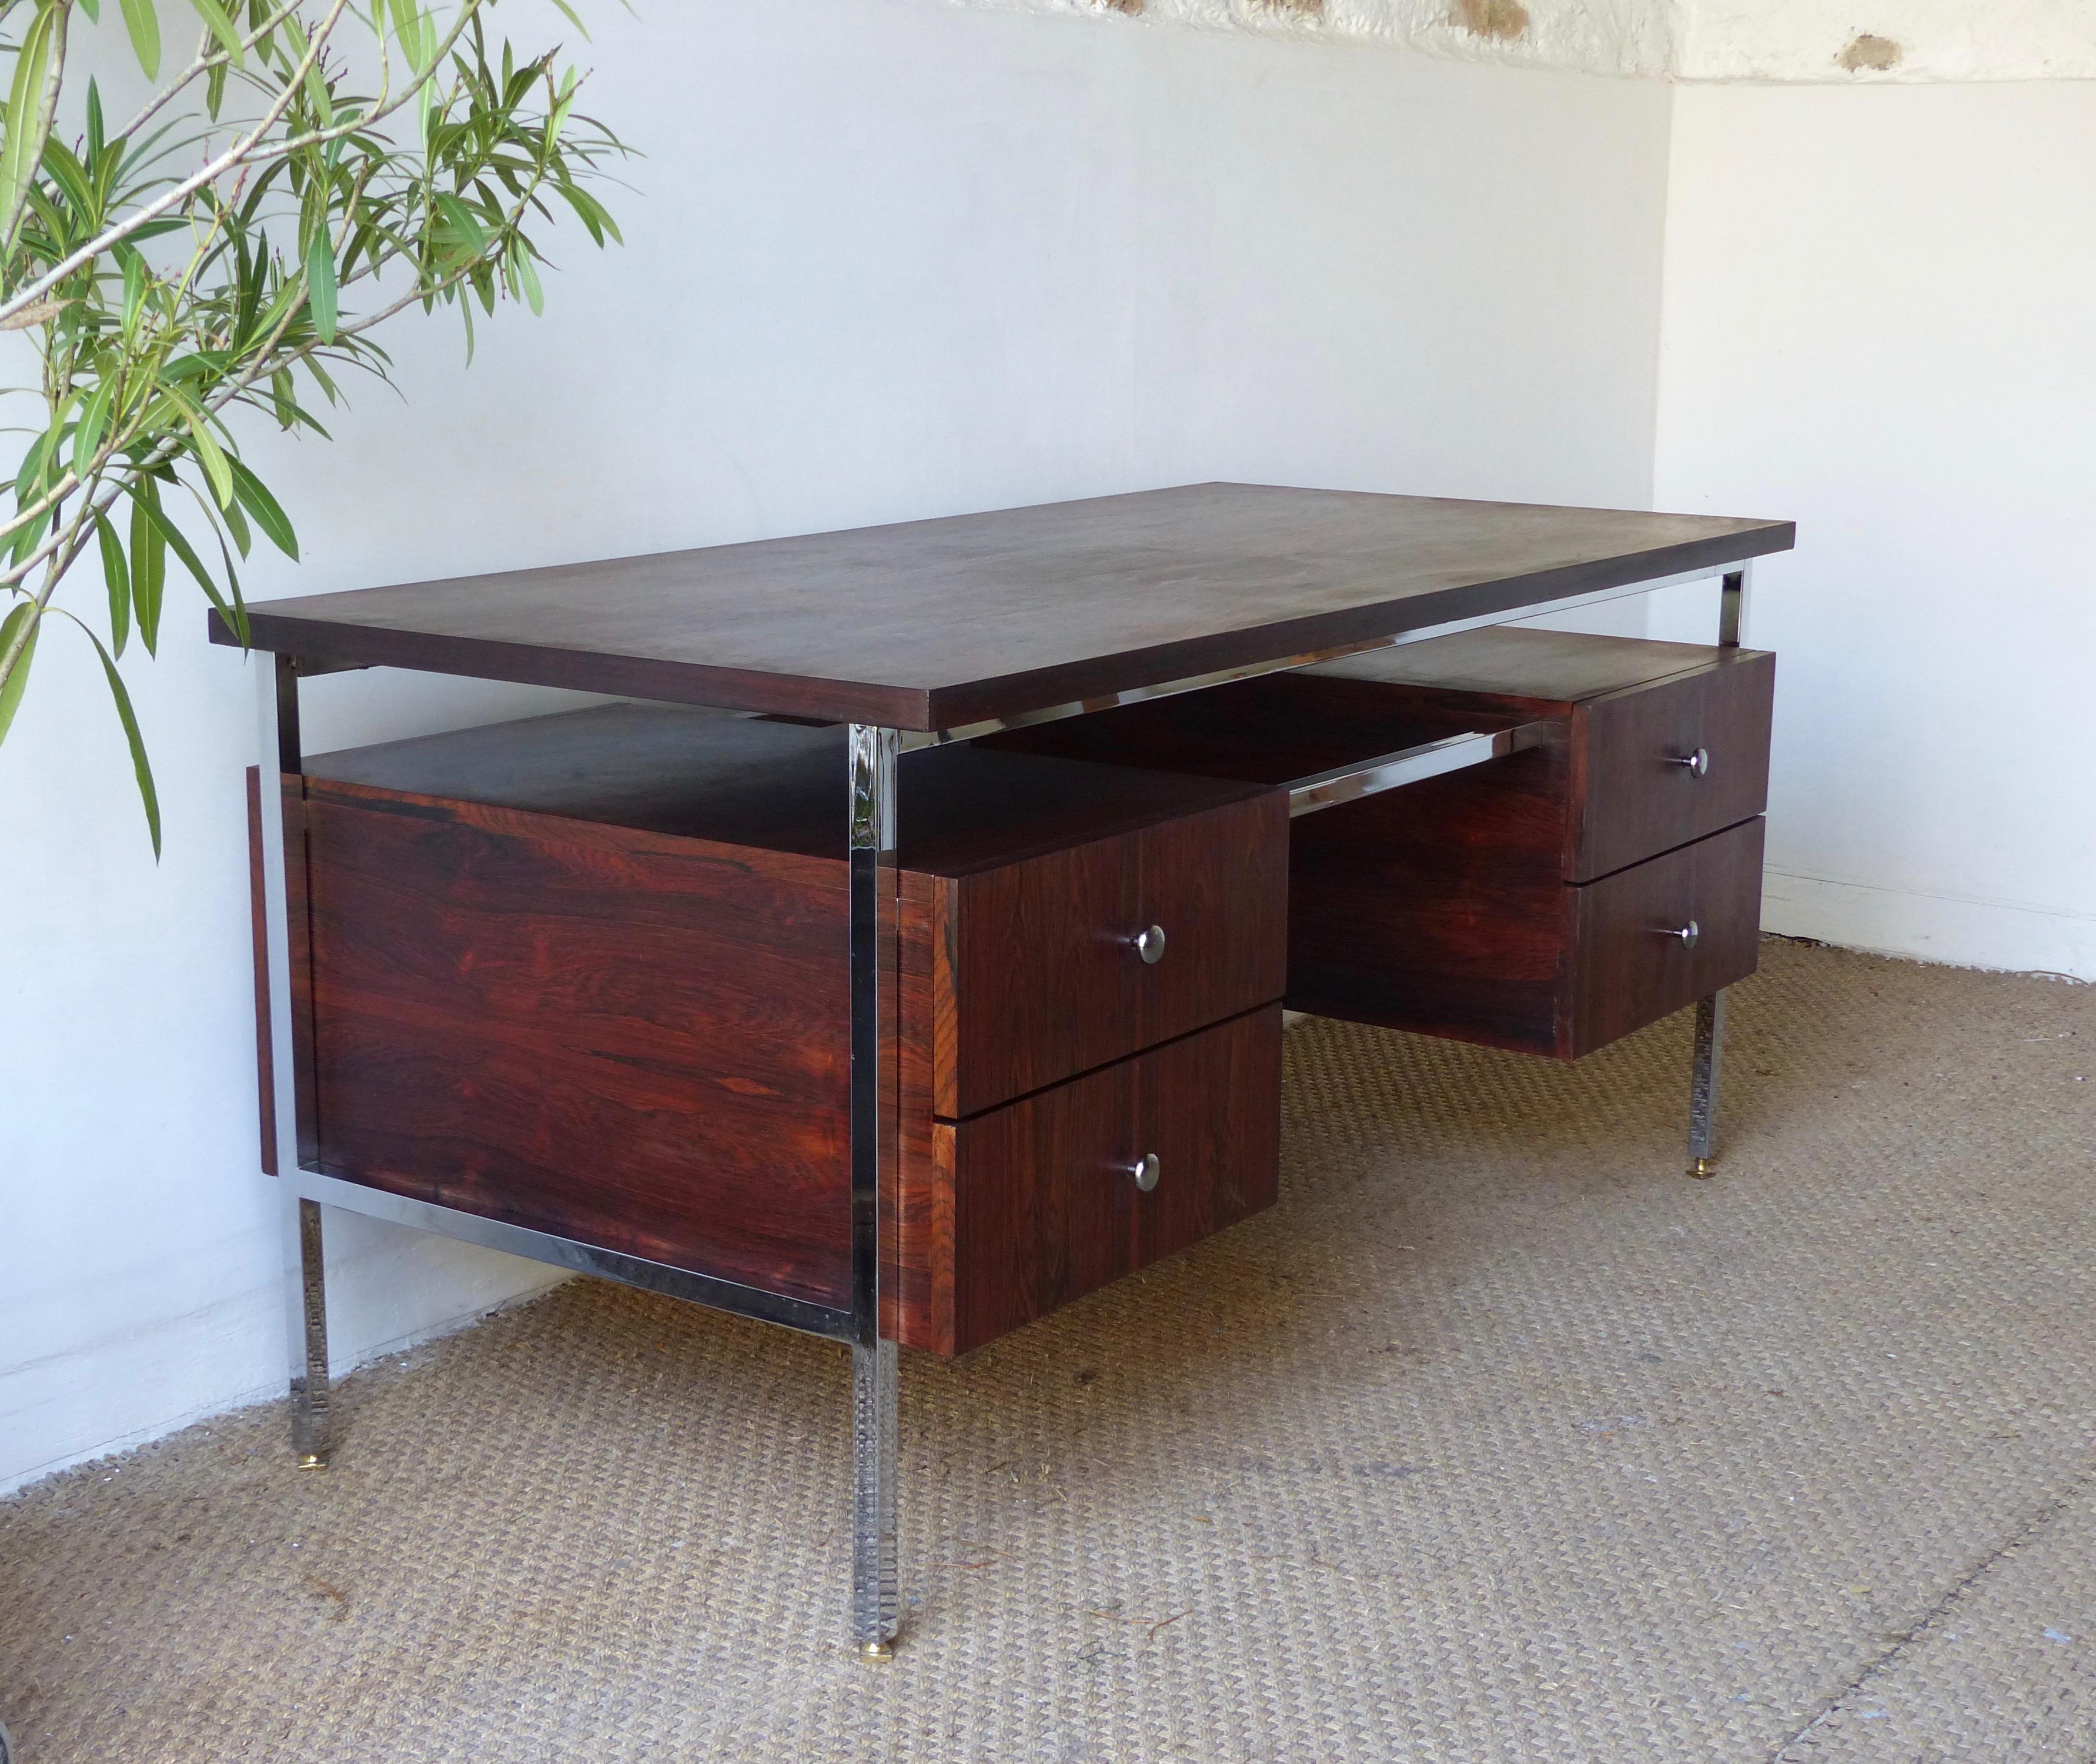 Vintage chrome and rosewood desk

Beautiful desk in Rosewood and chrome of 1970s.

Storage space with 2 drawers and a large file drawer.

As chic in the front as in the back.

In very good state of conservation. Minor traces of use. Very